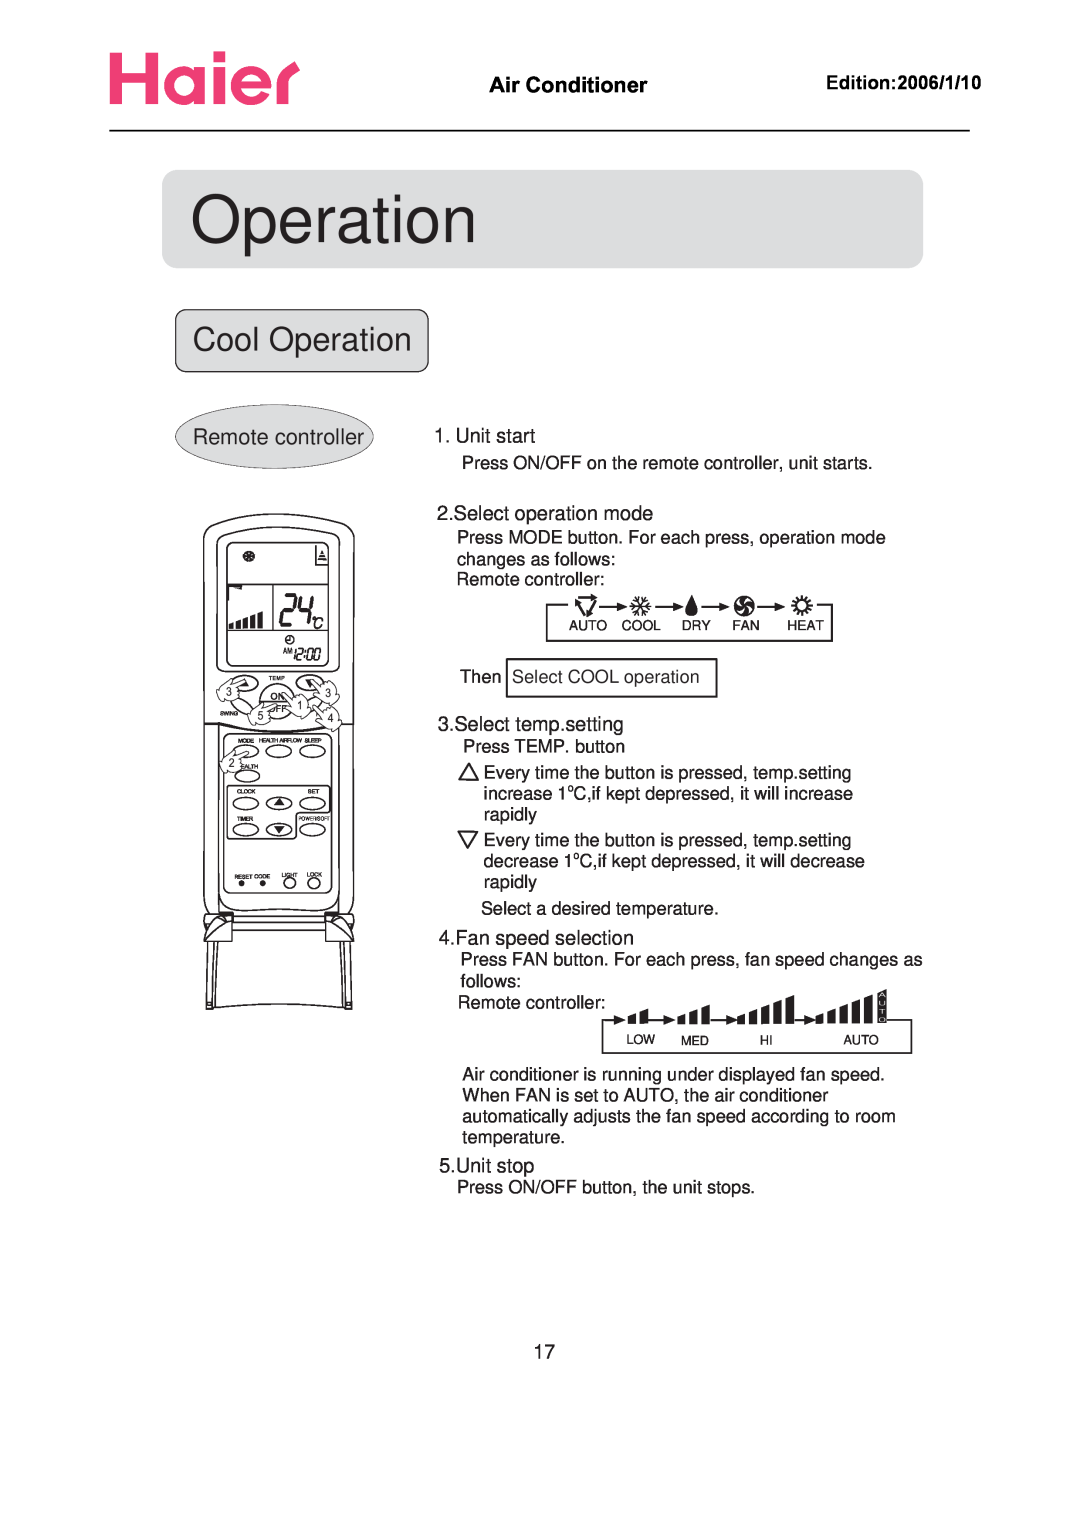 Haier Compact Air Conditioner manual Cool Operation, Remote controller, Air Conditioner      , Edition 2006/1/10 